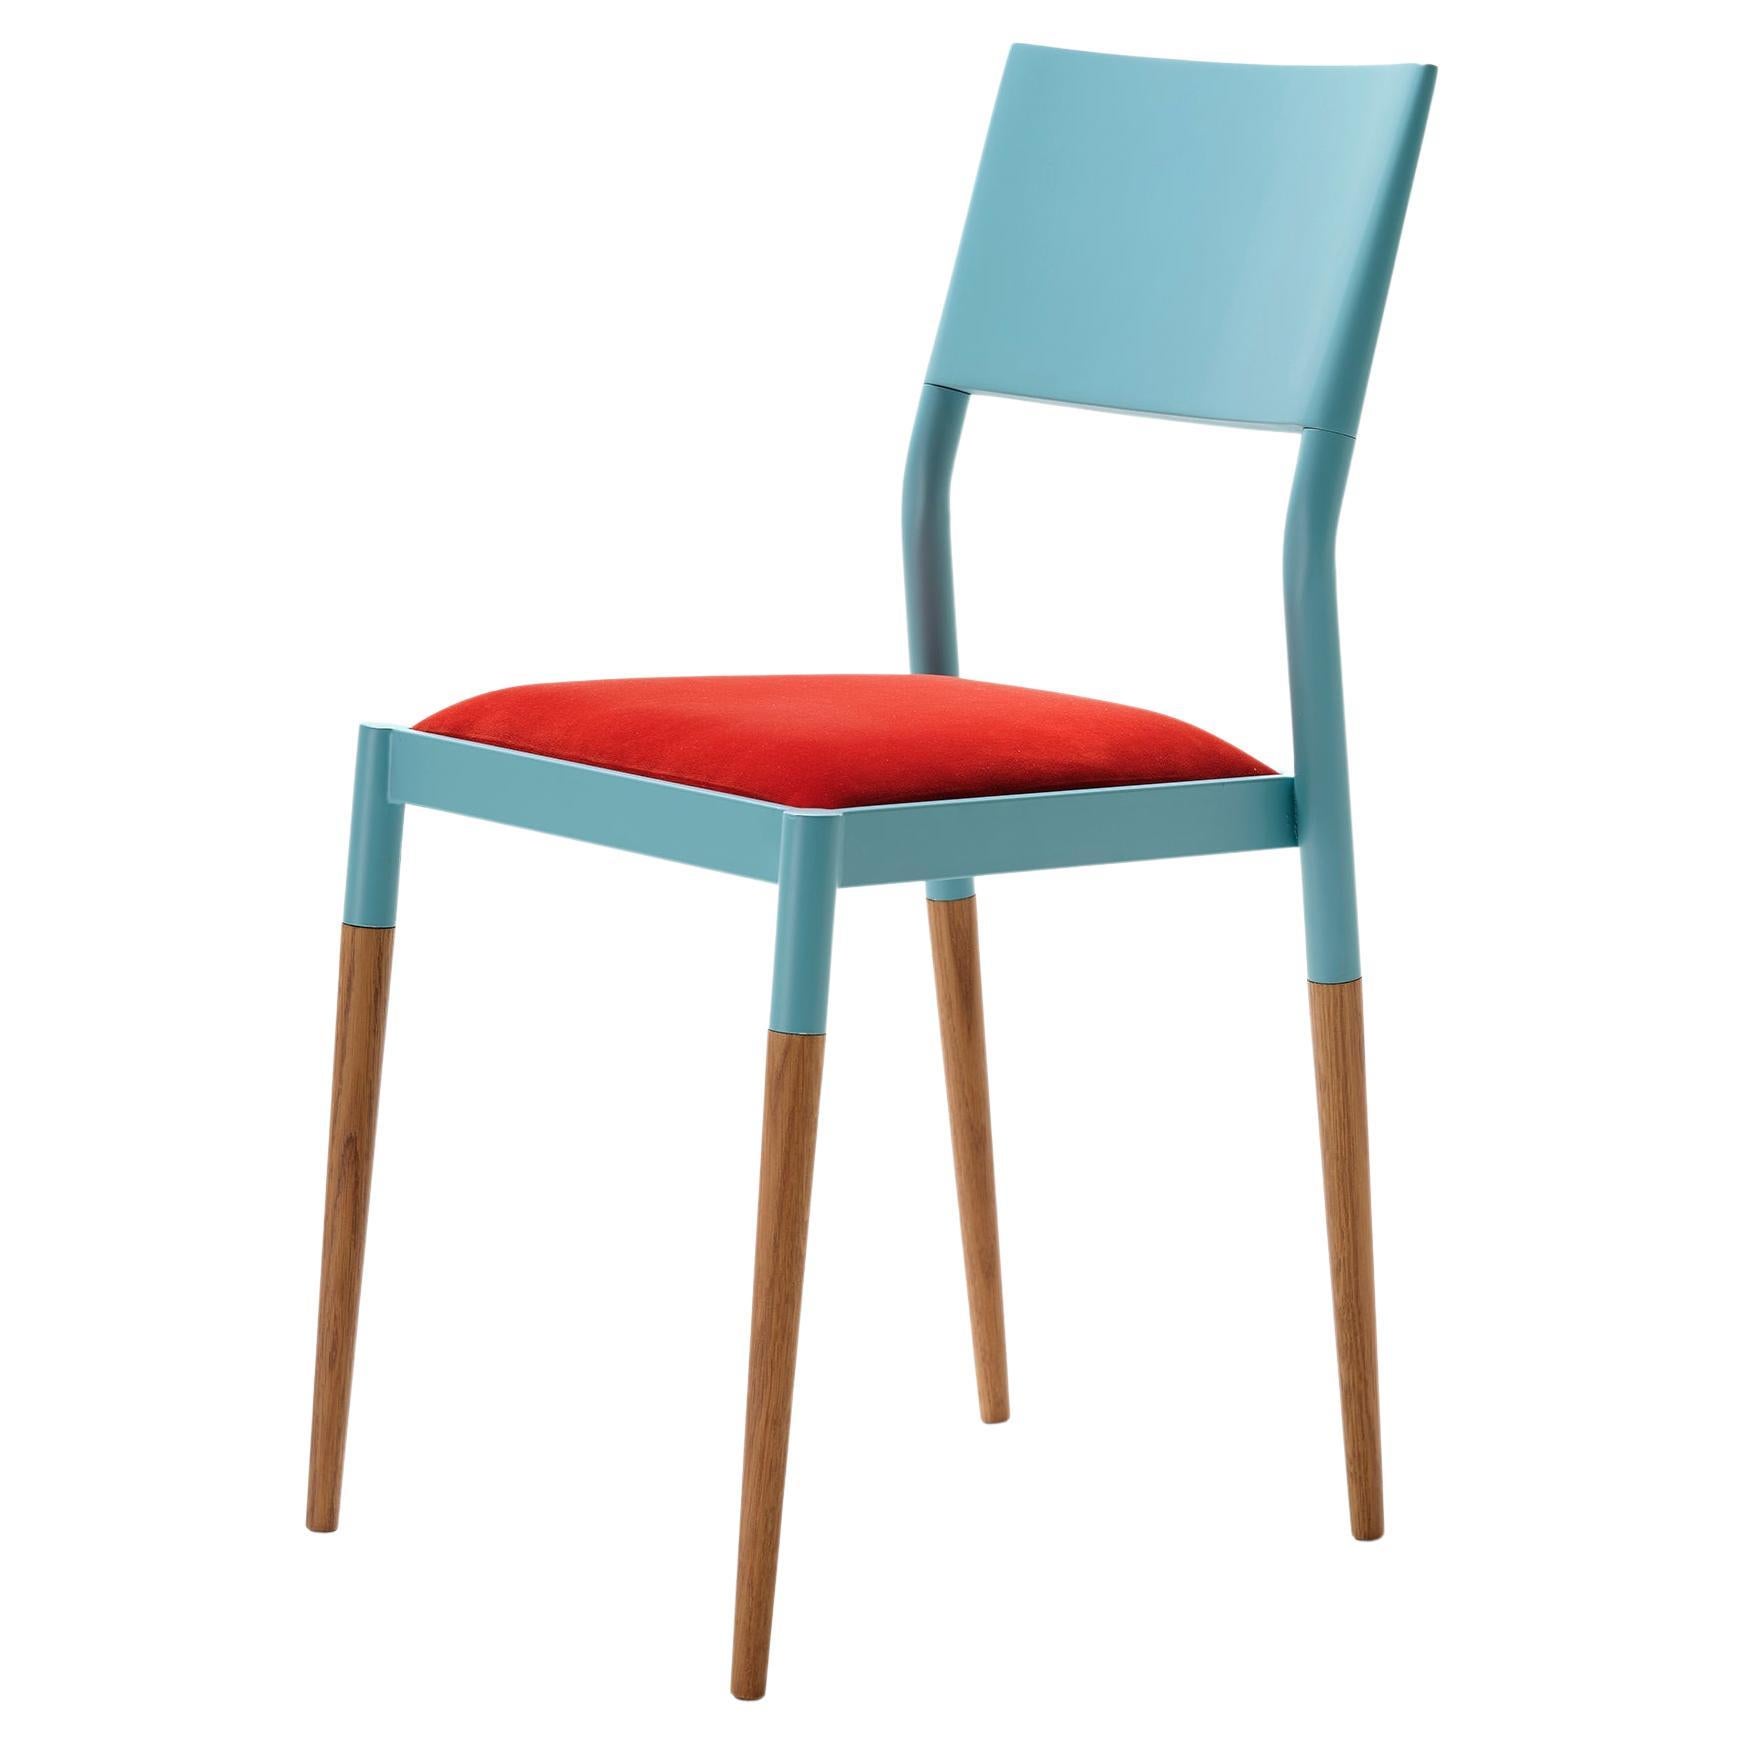 21st Century Modern Steel And Wood Chair With Velvet Upholstered Seat For Sale